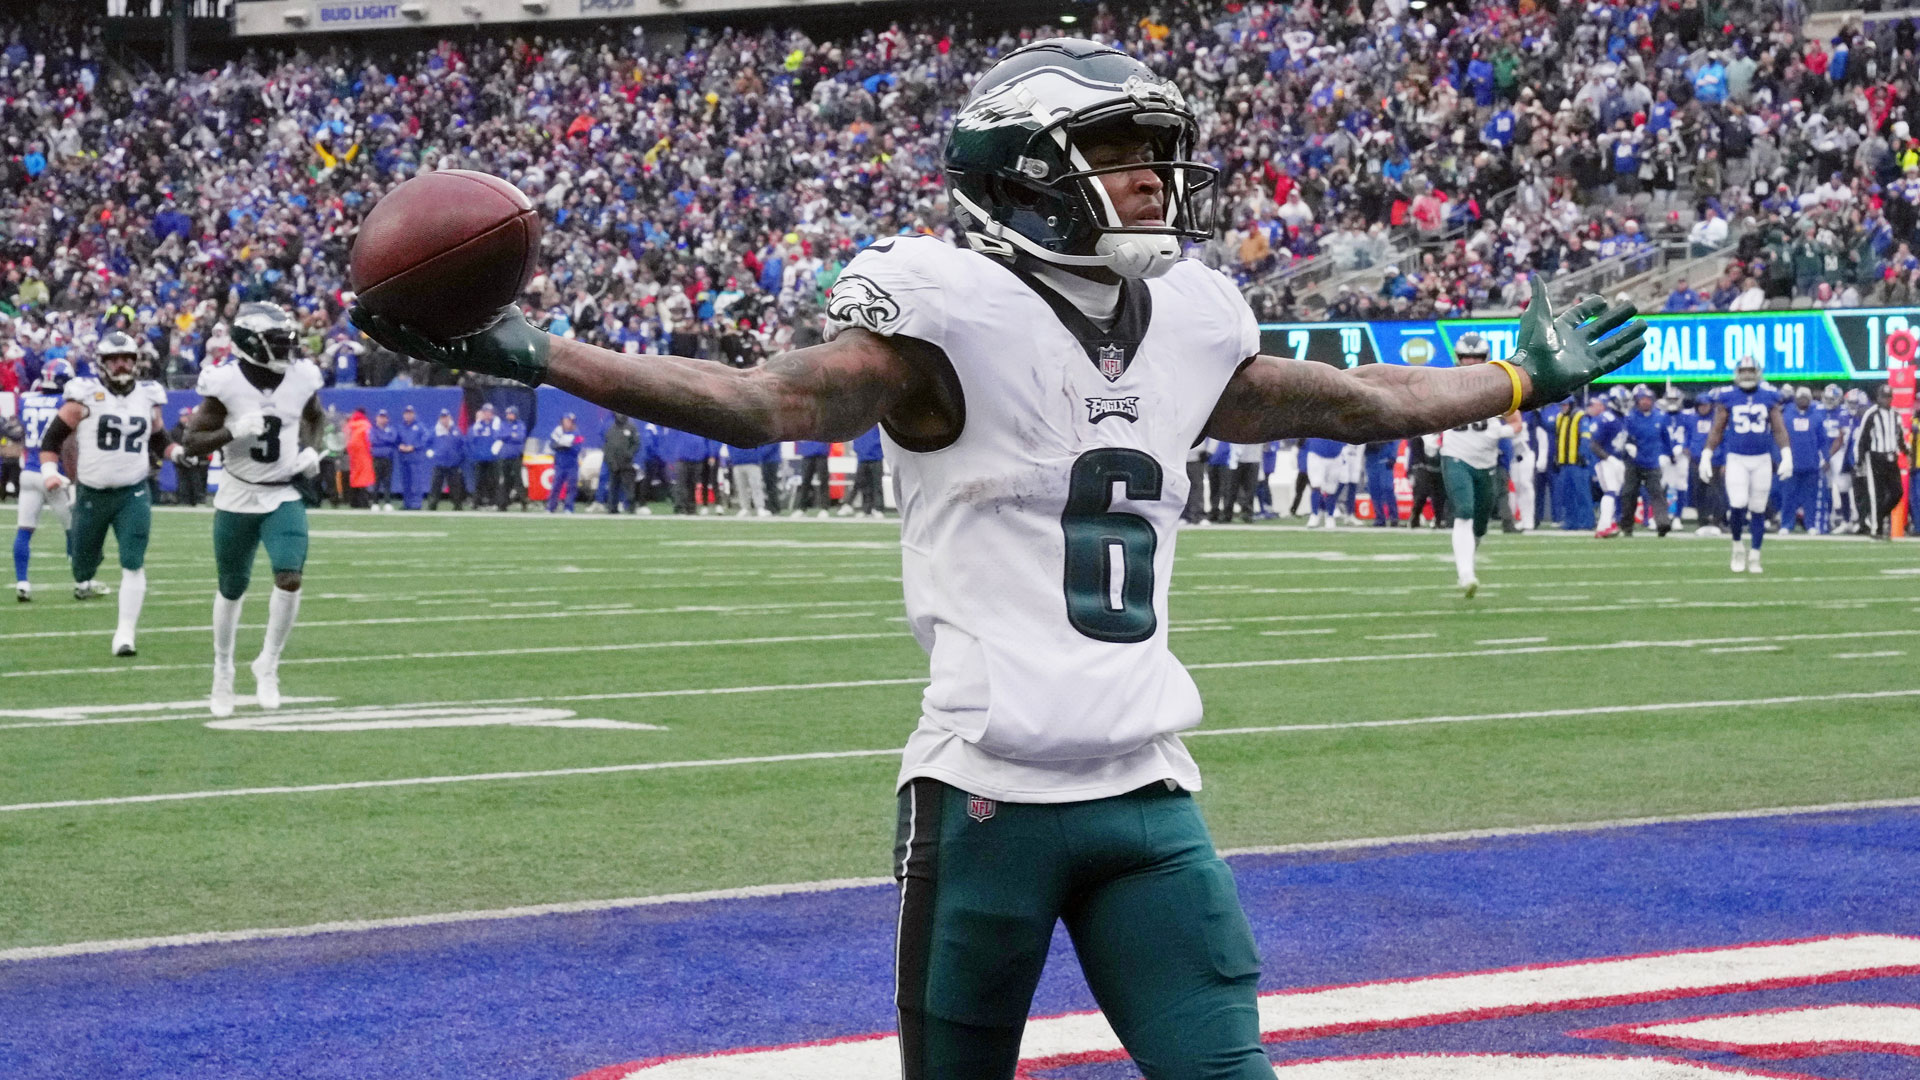 Playoff Preview: Eagles are not overlooking Giants